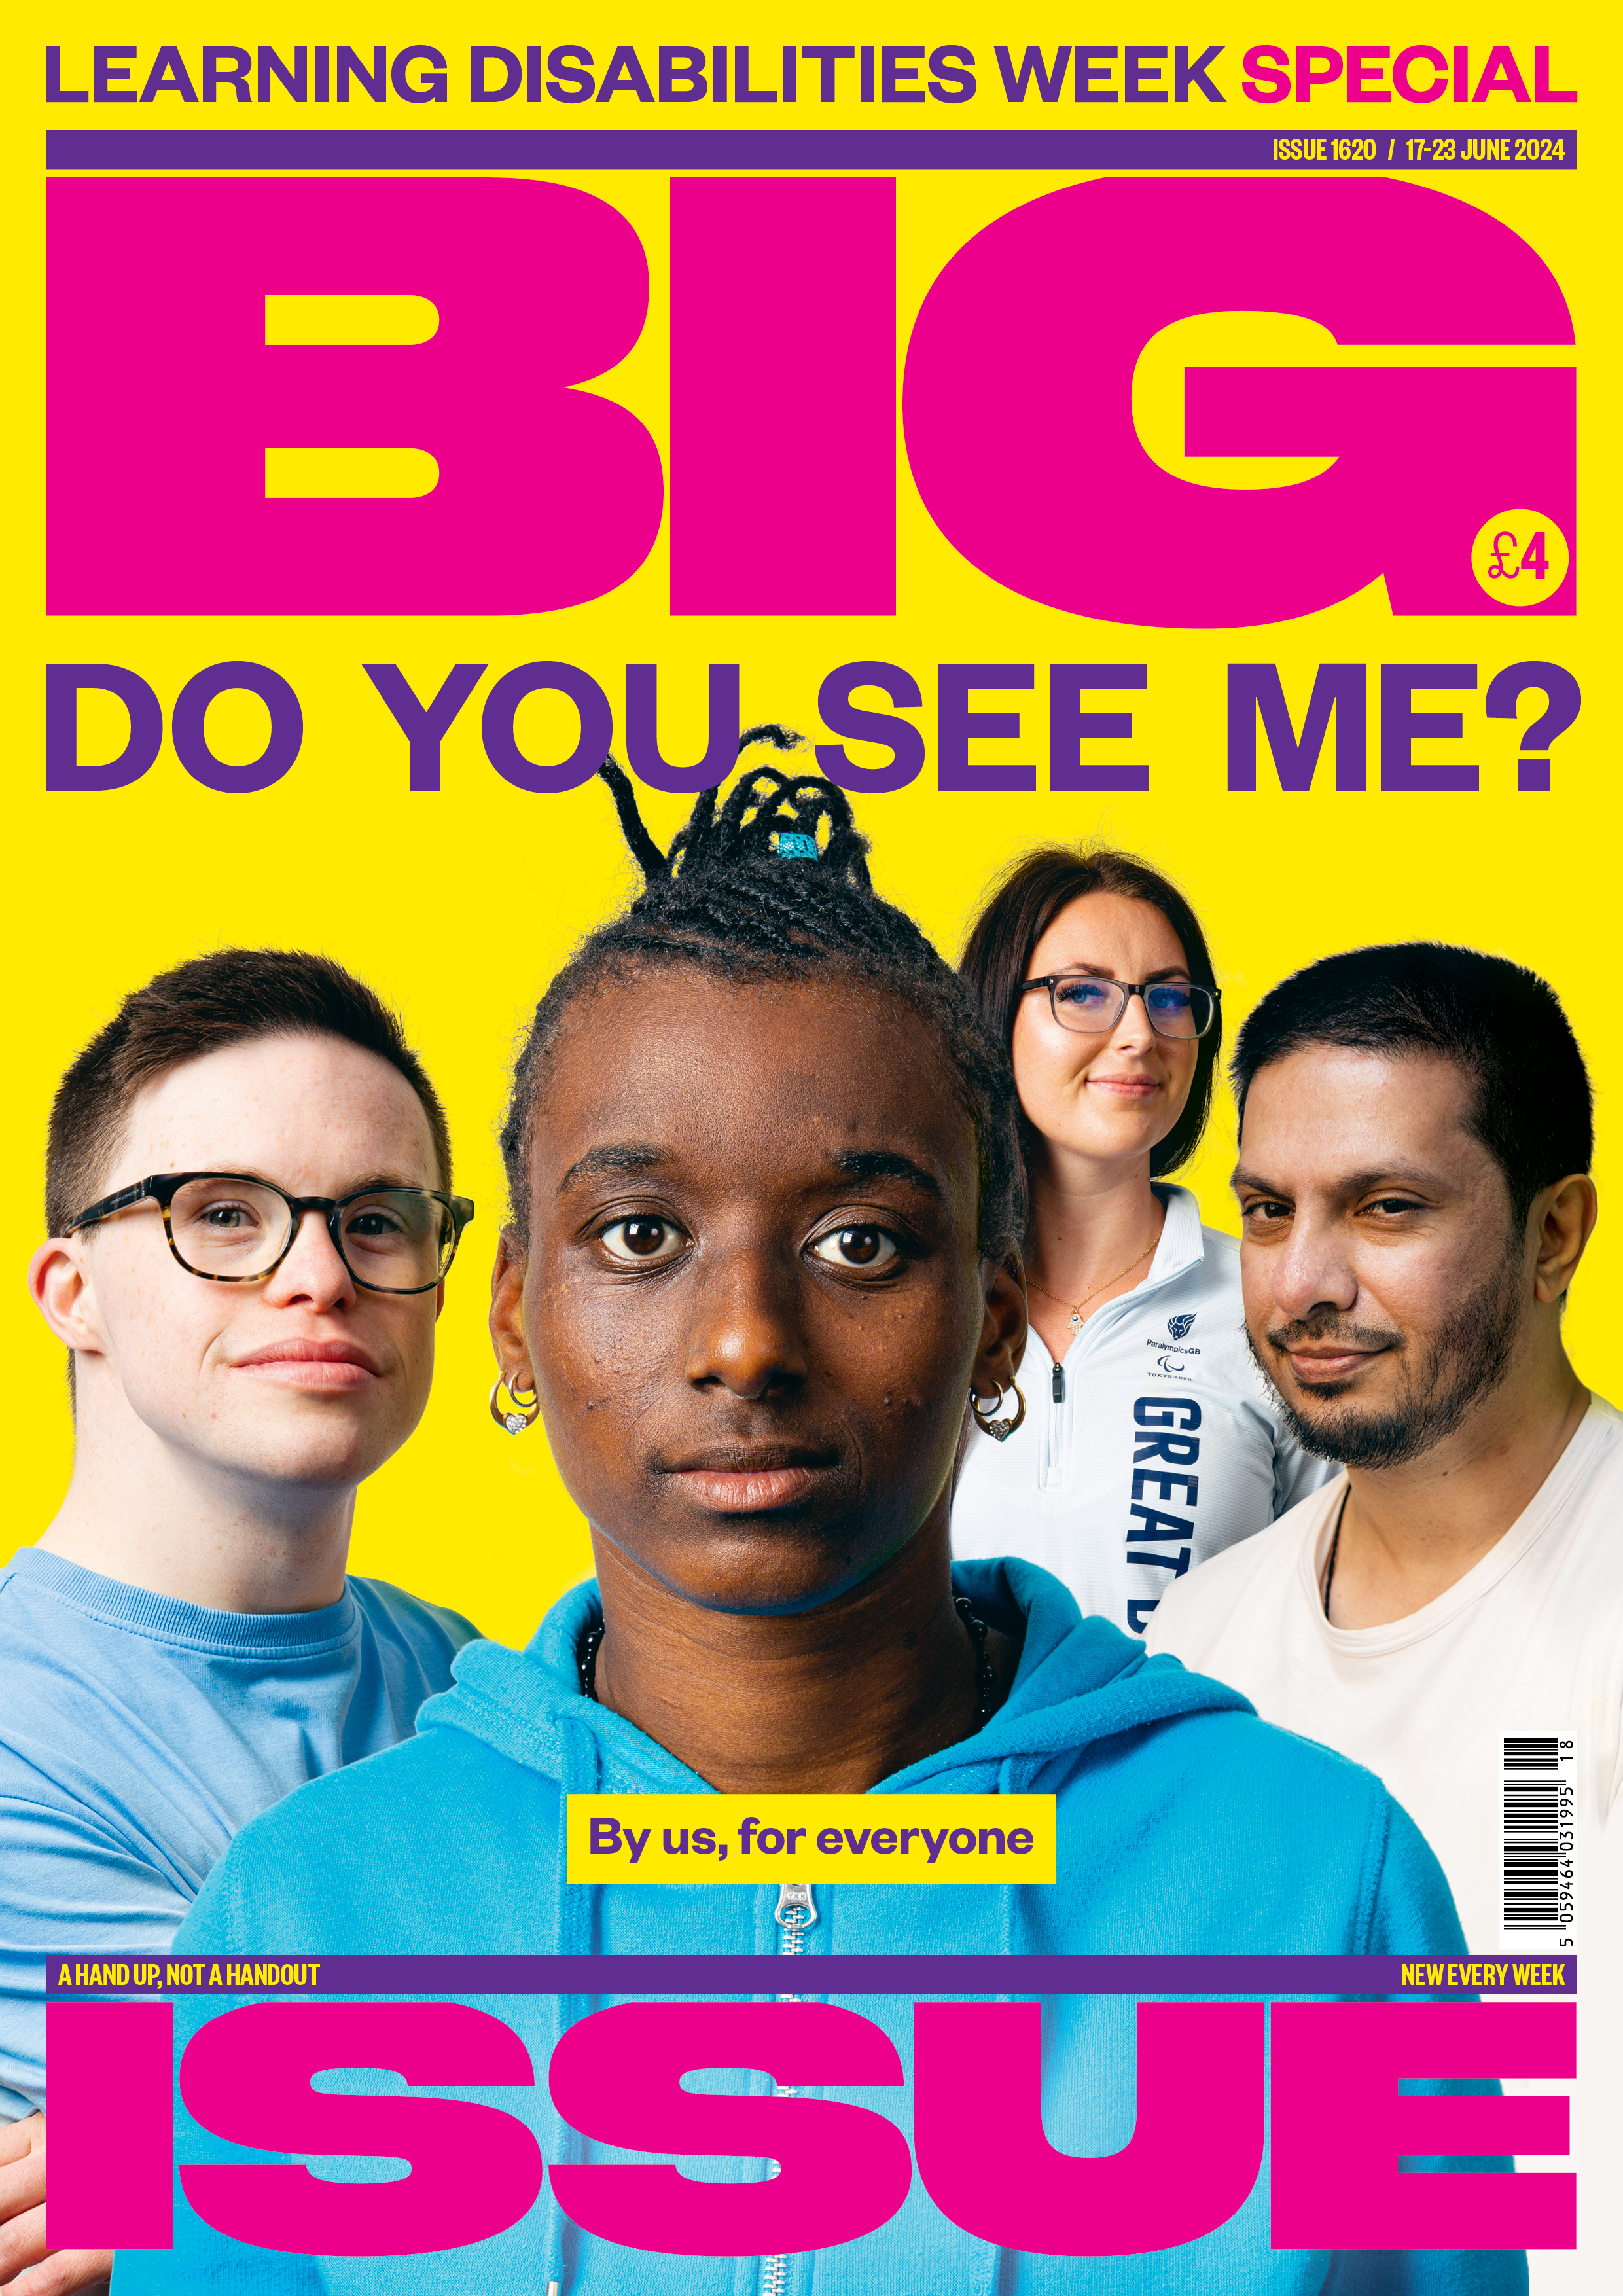 A front cover of Big Issue magazine with four people with learning disabilities and the words Do You See Me